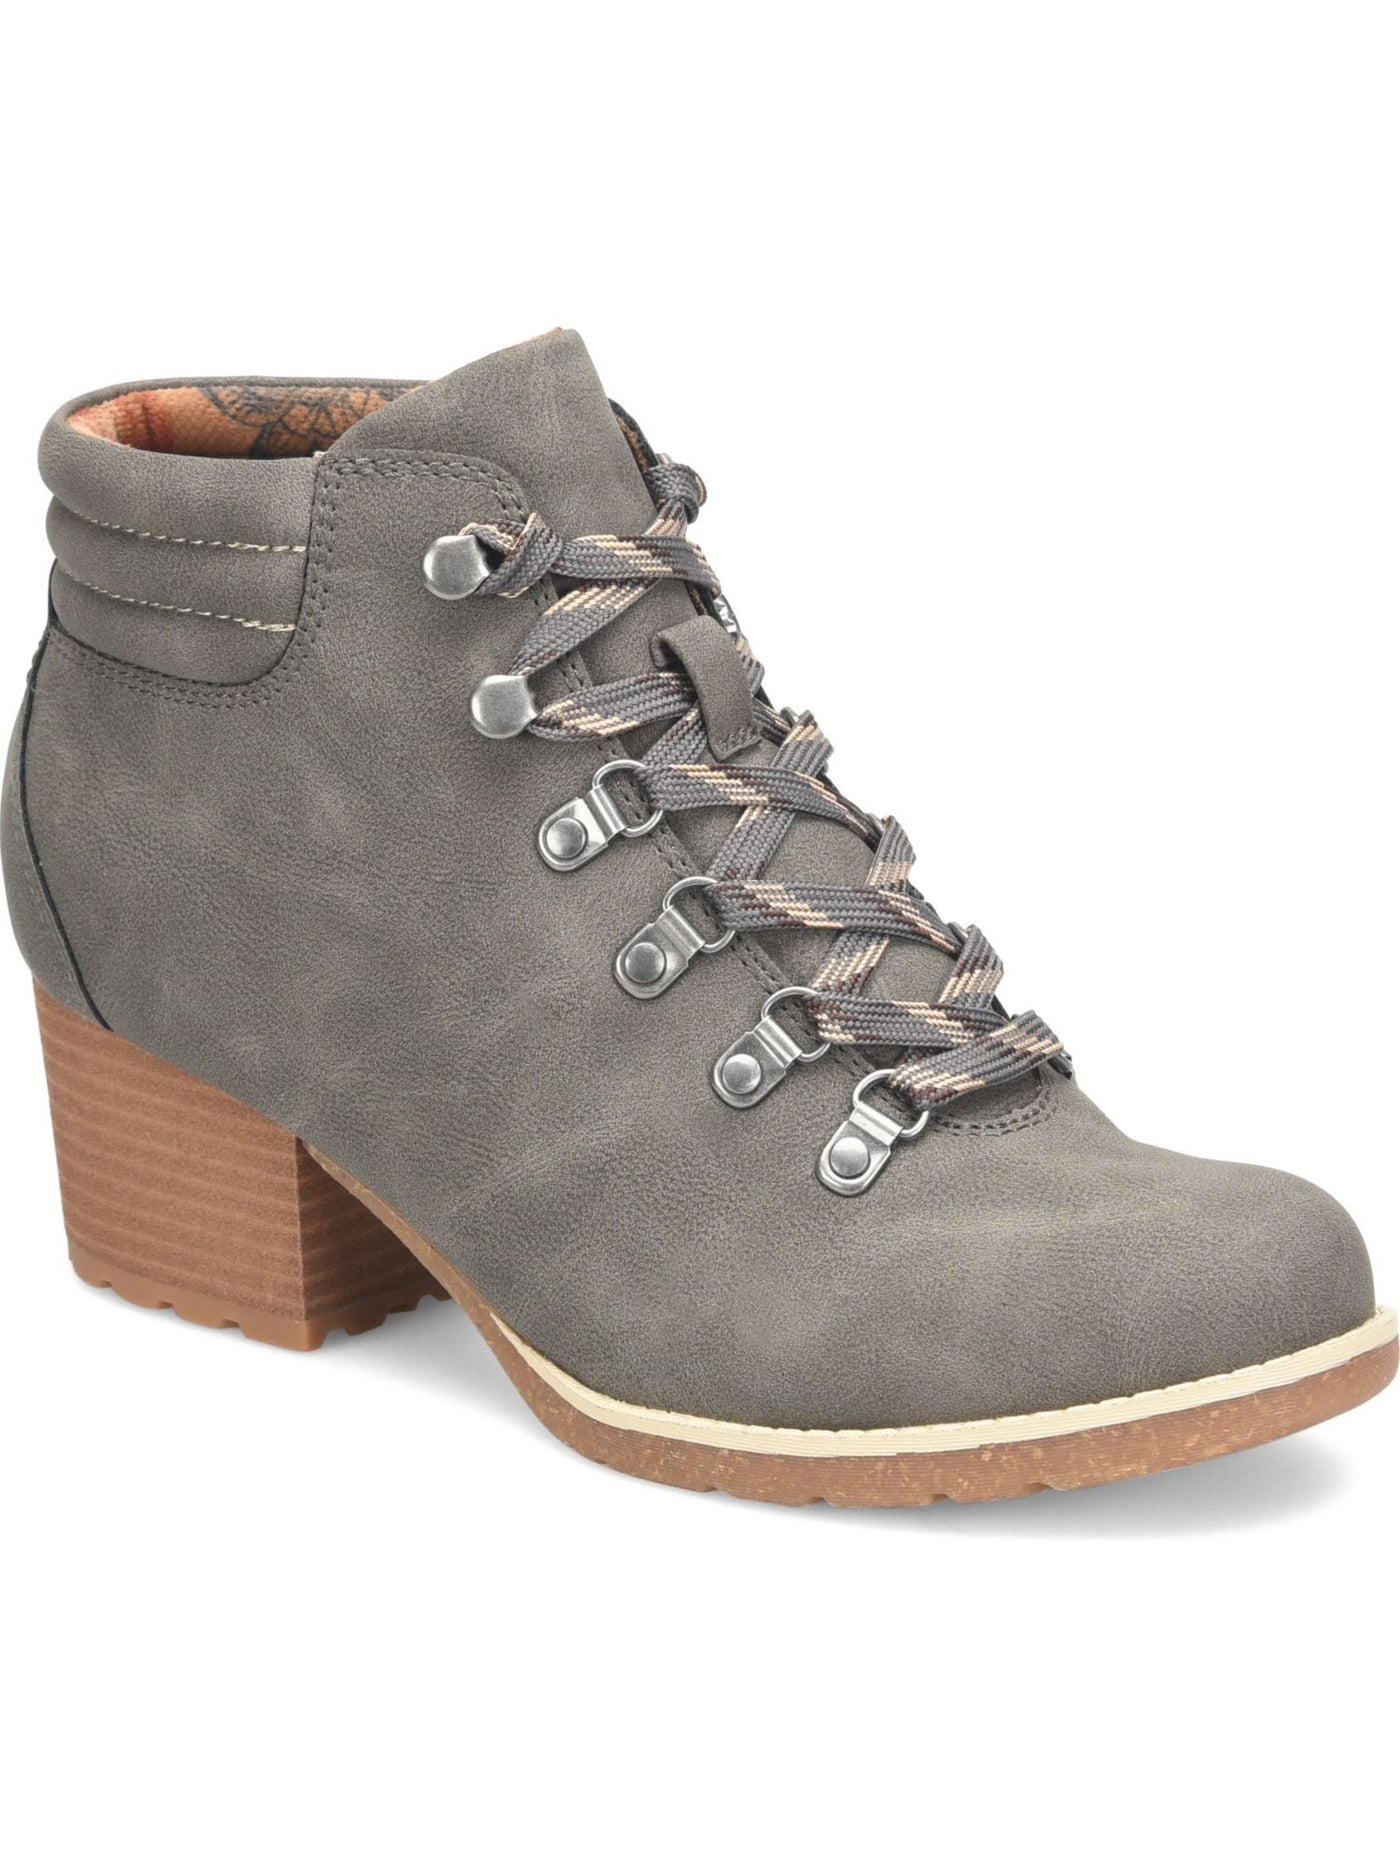 BOC Womens Gray Floral Inside Padded Cuff Hiker-Inspired Cushioned Alder Round Toe Block Heel Lace-Up Booties 10 M